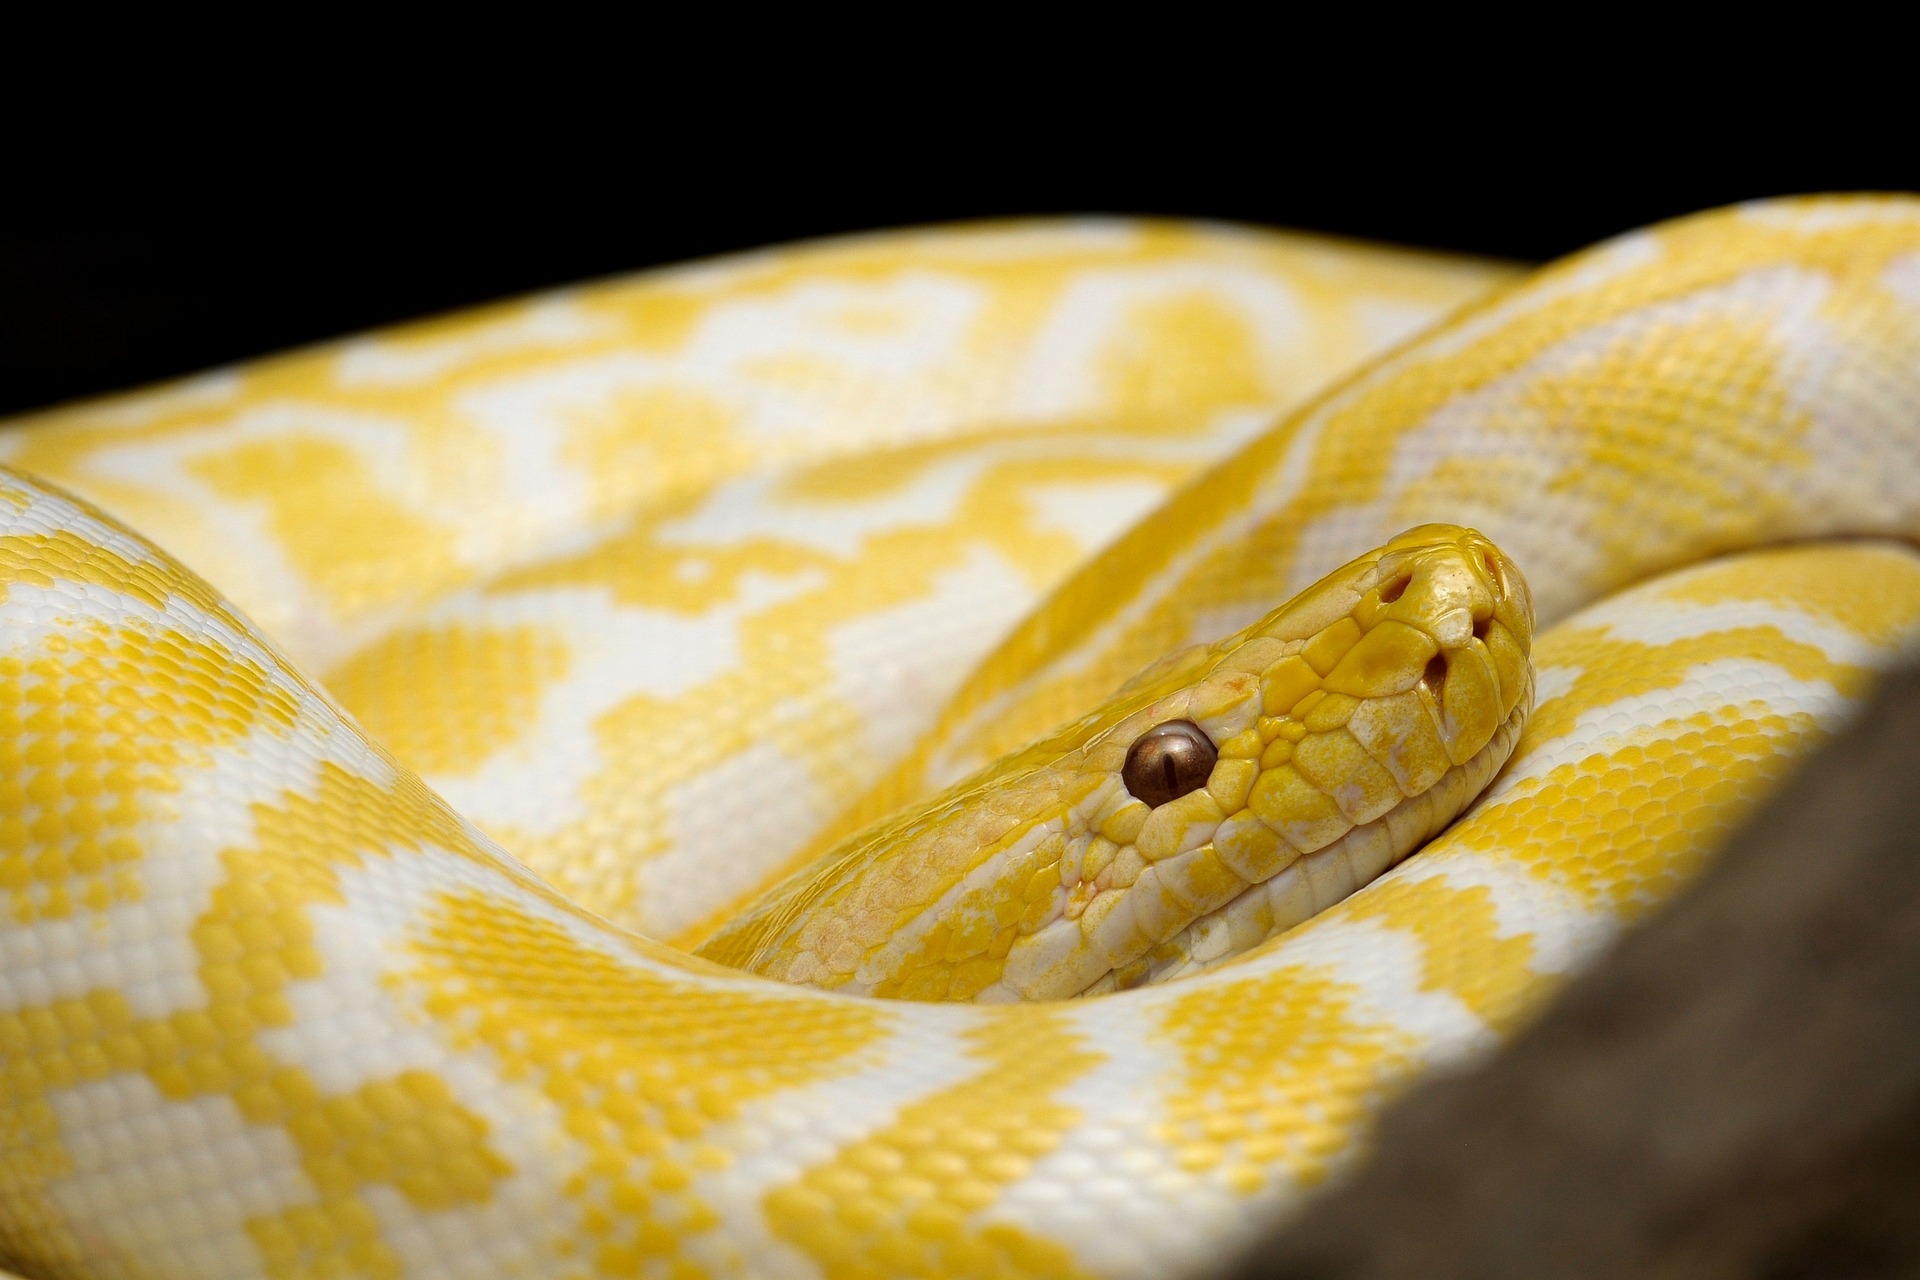 A yellow snake all curled up with its resting on its body